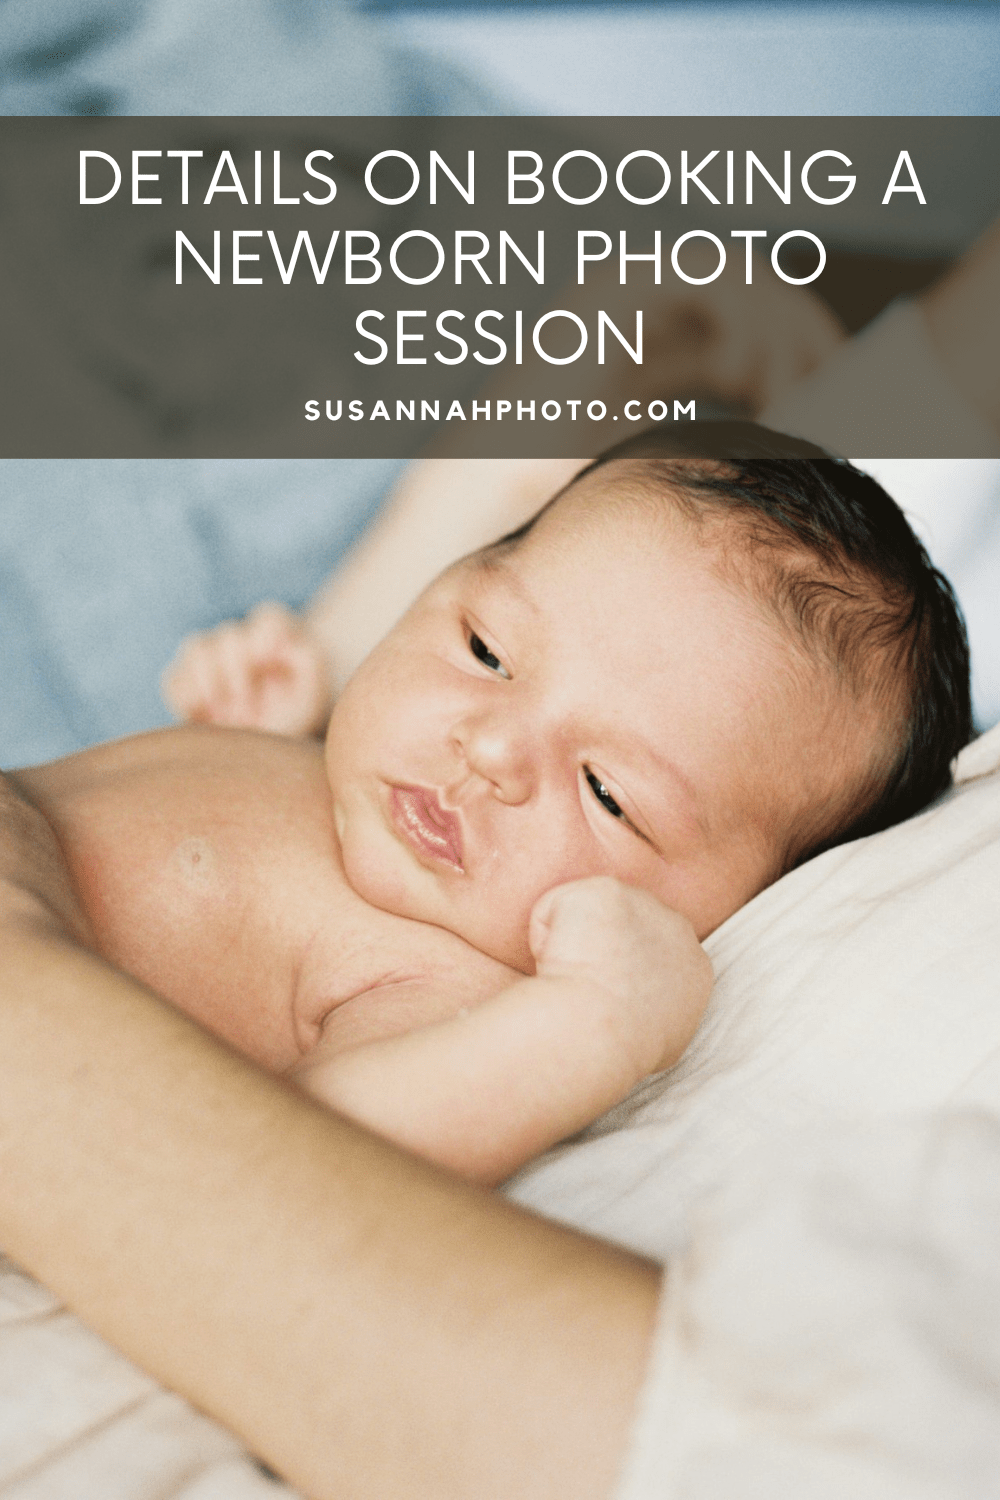 cute baby girl photo with text above her that read "details on booking a newborn photo session"